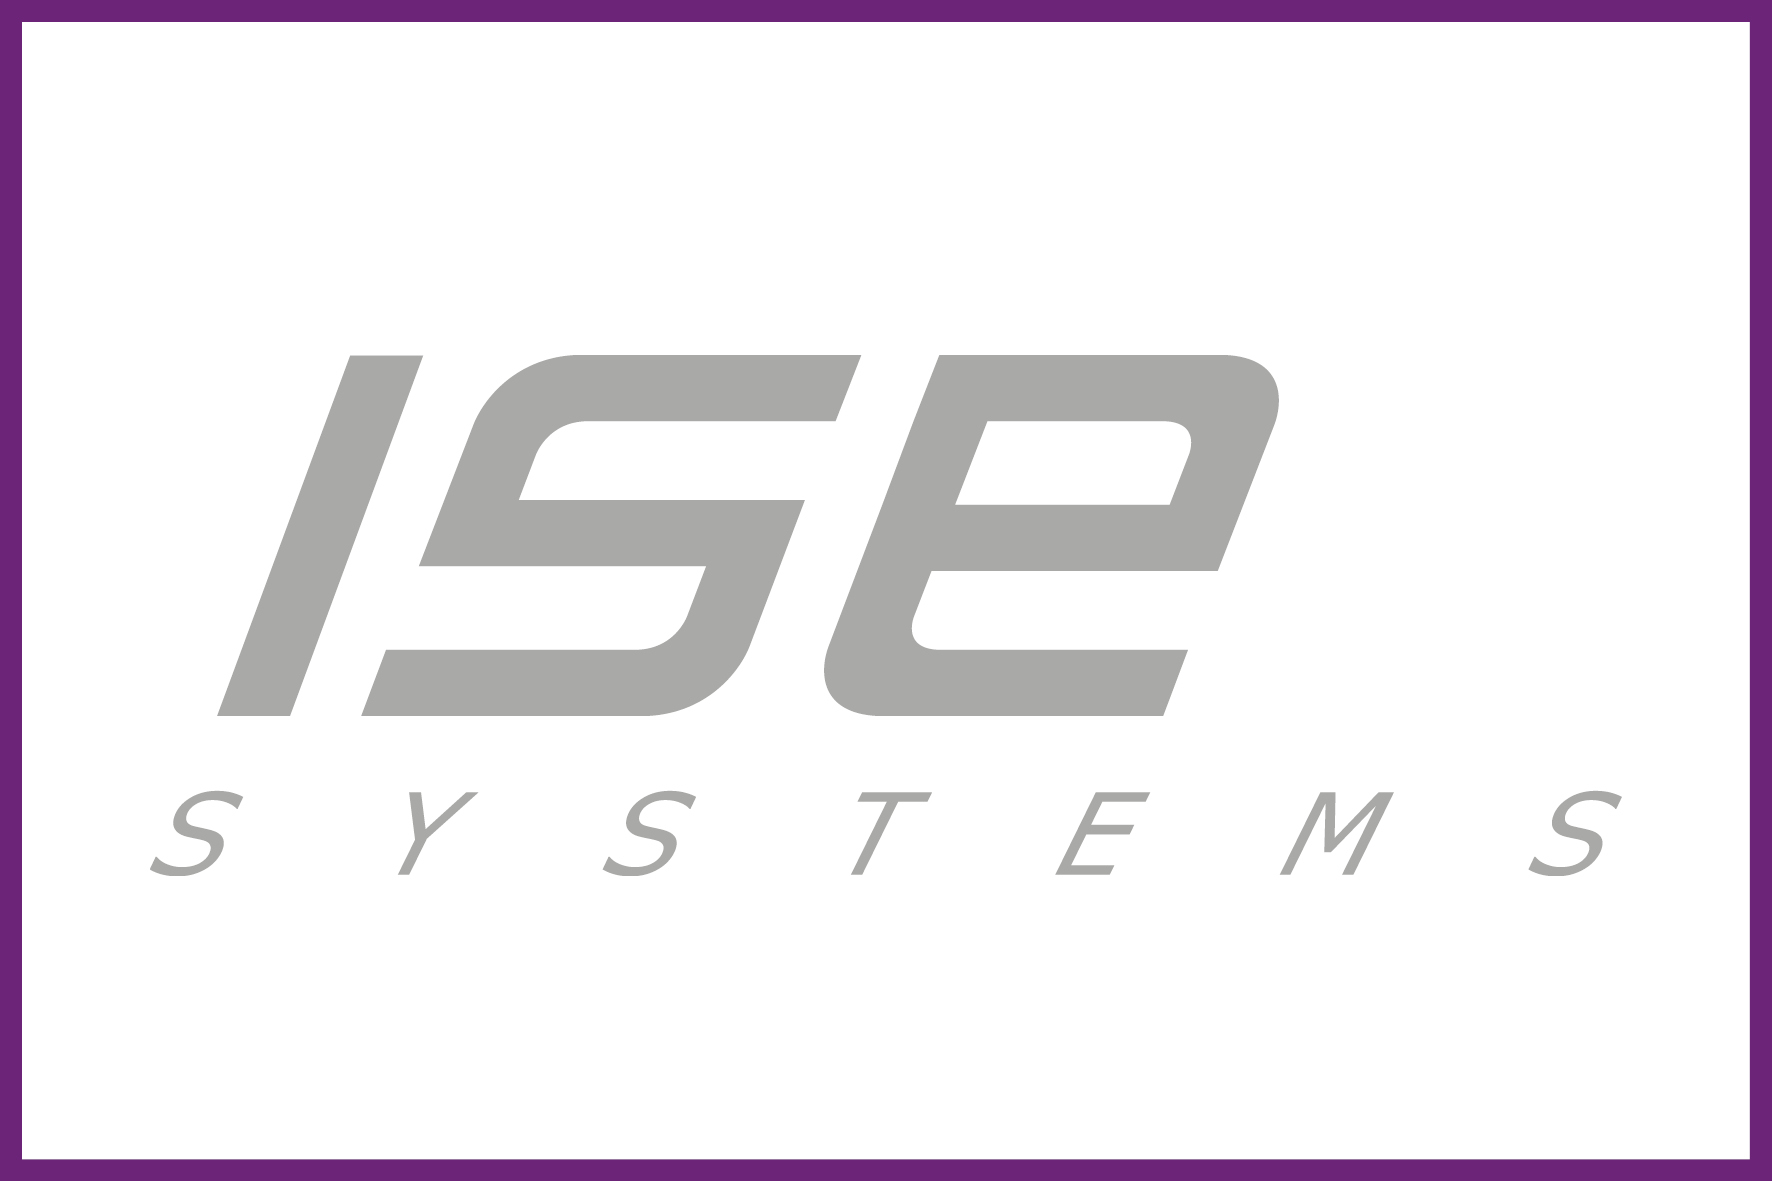 security-forum-ise-systems-sponsors